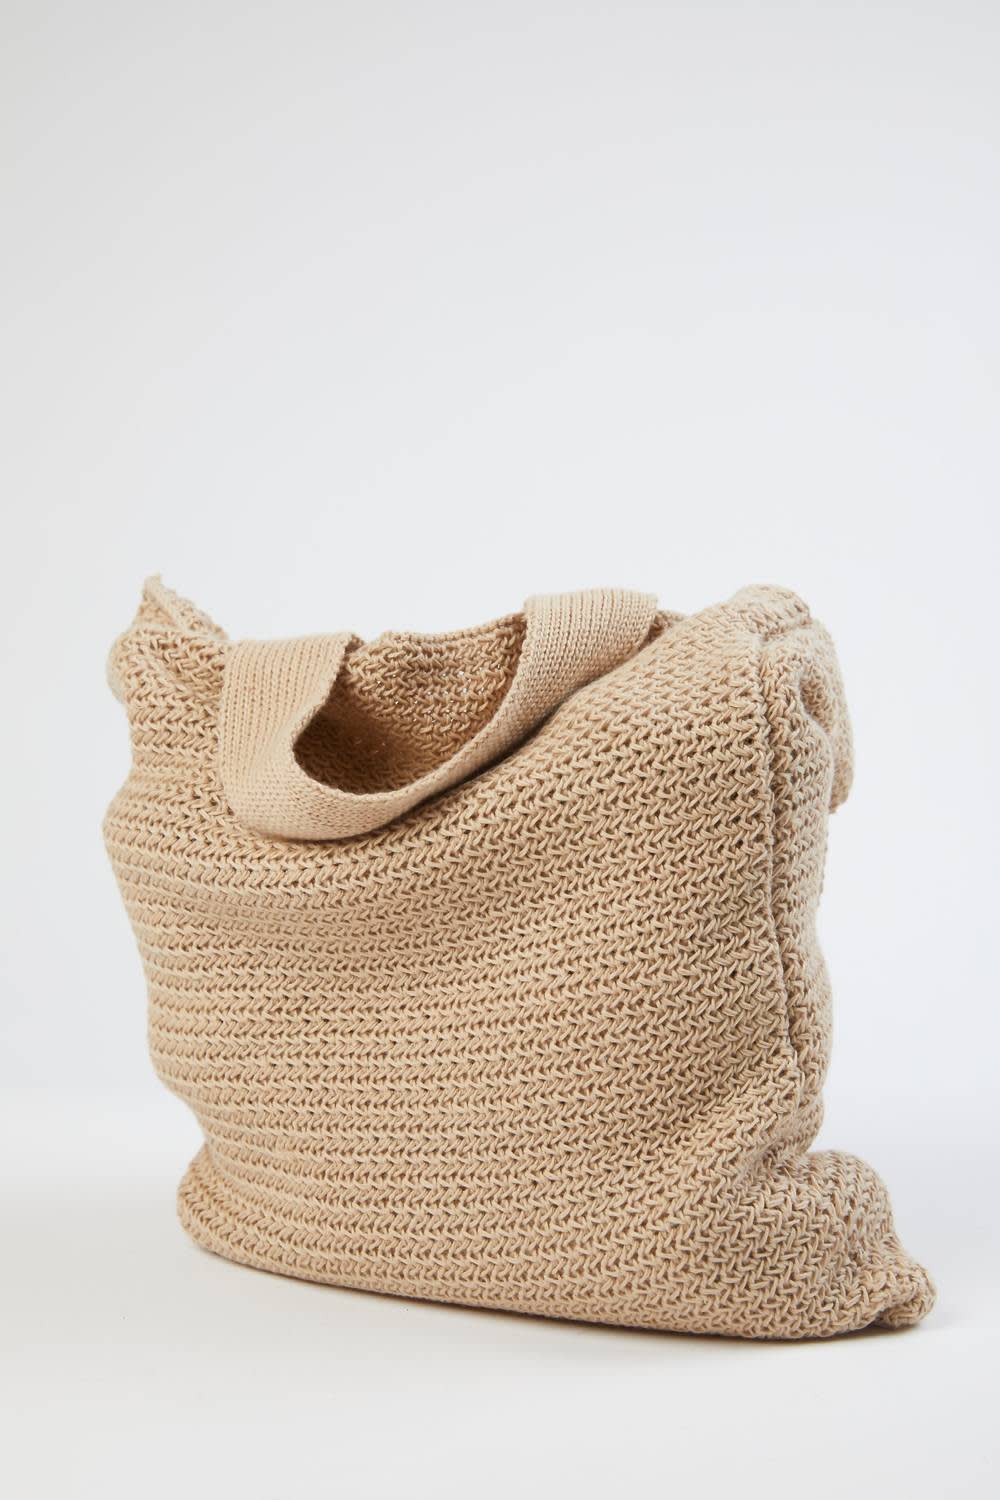 AMBER HARDS - Marché Tote